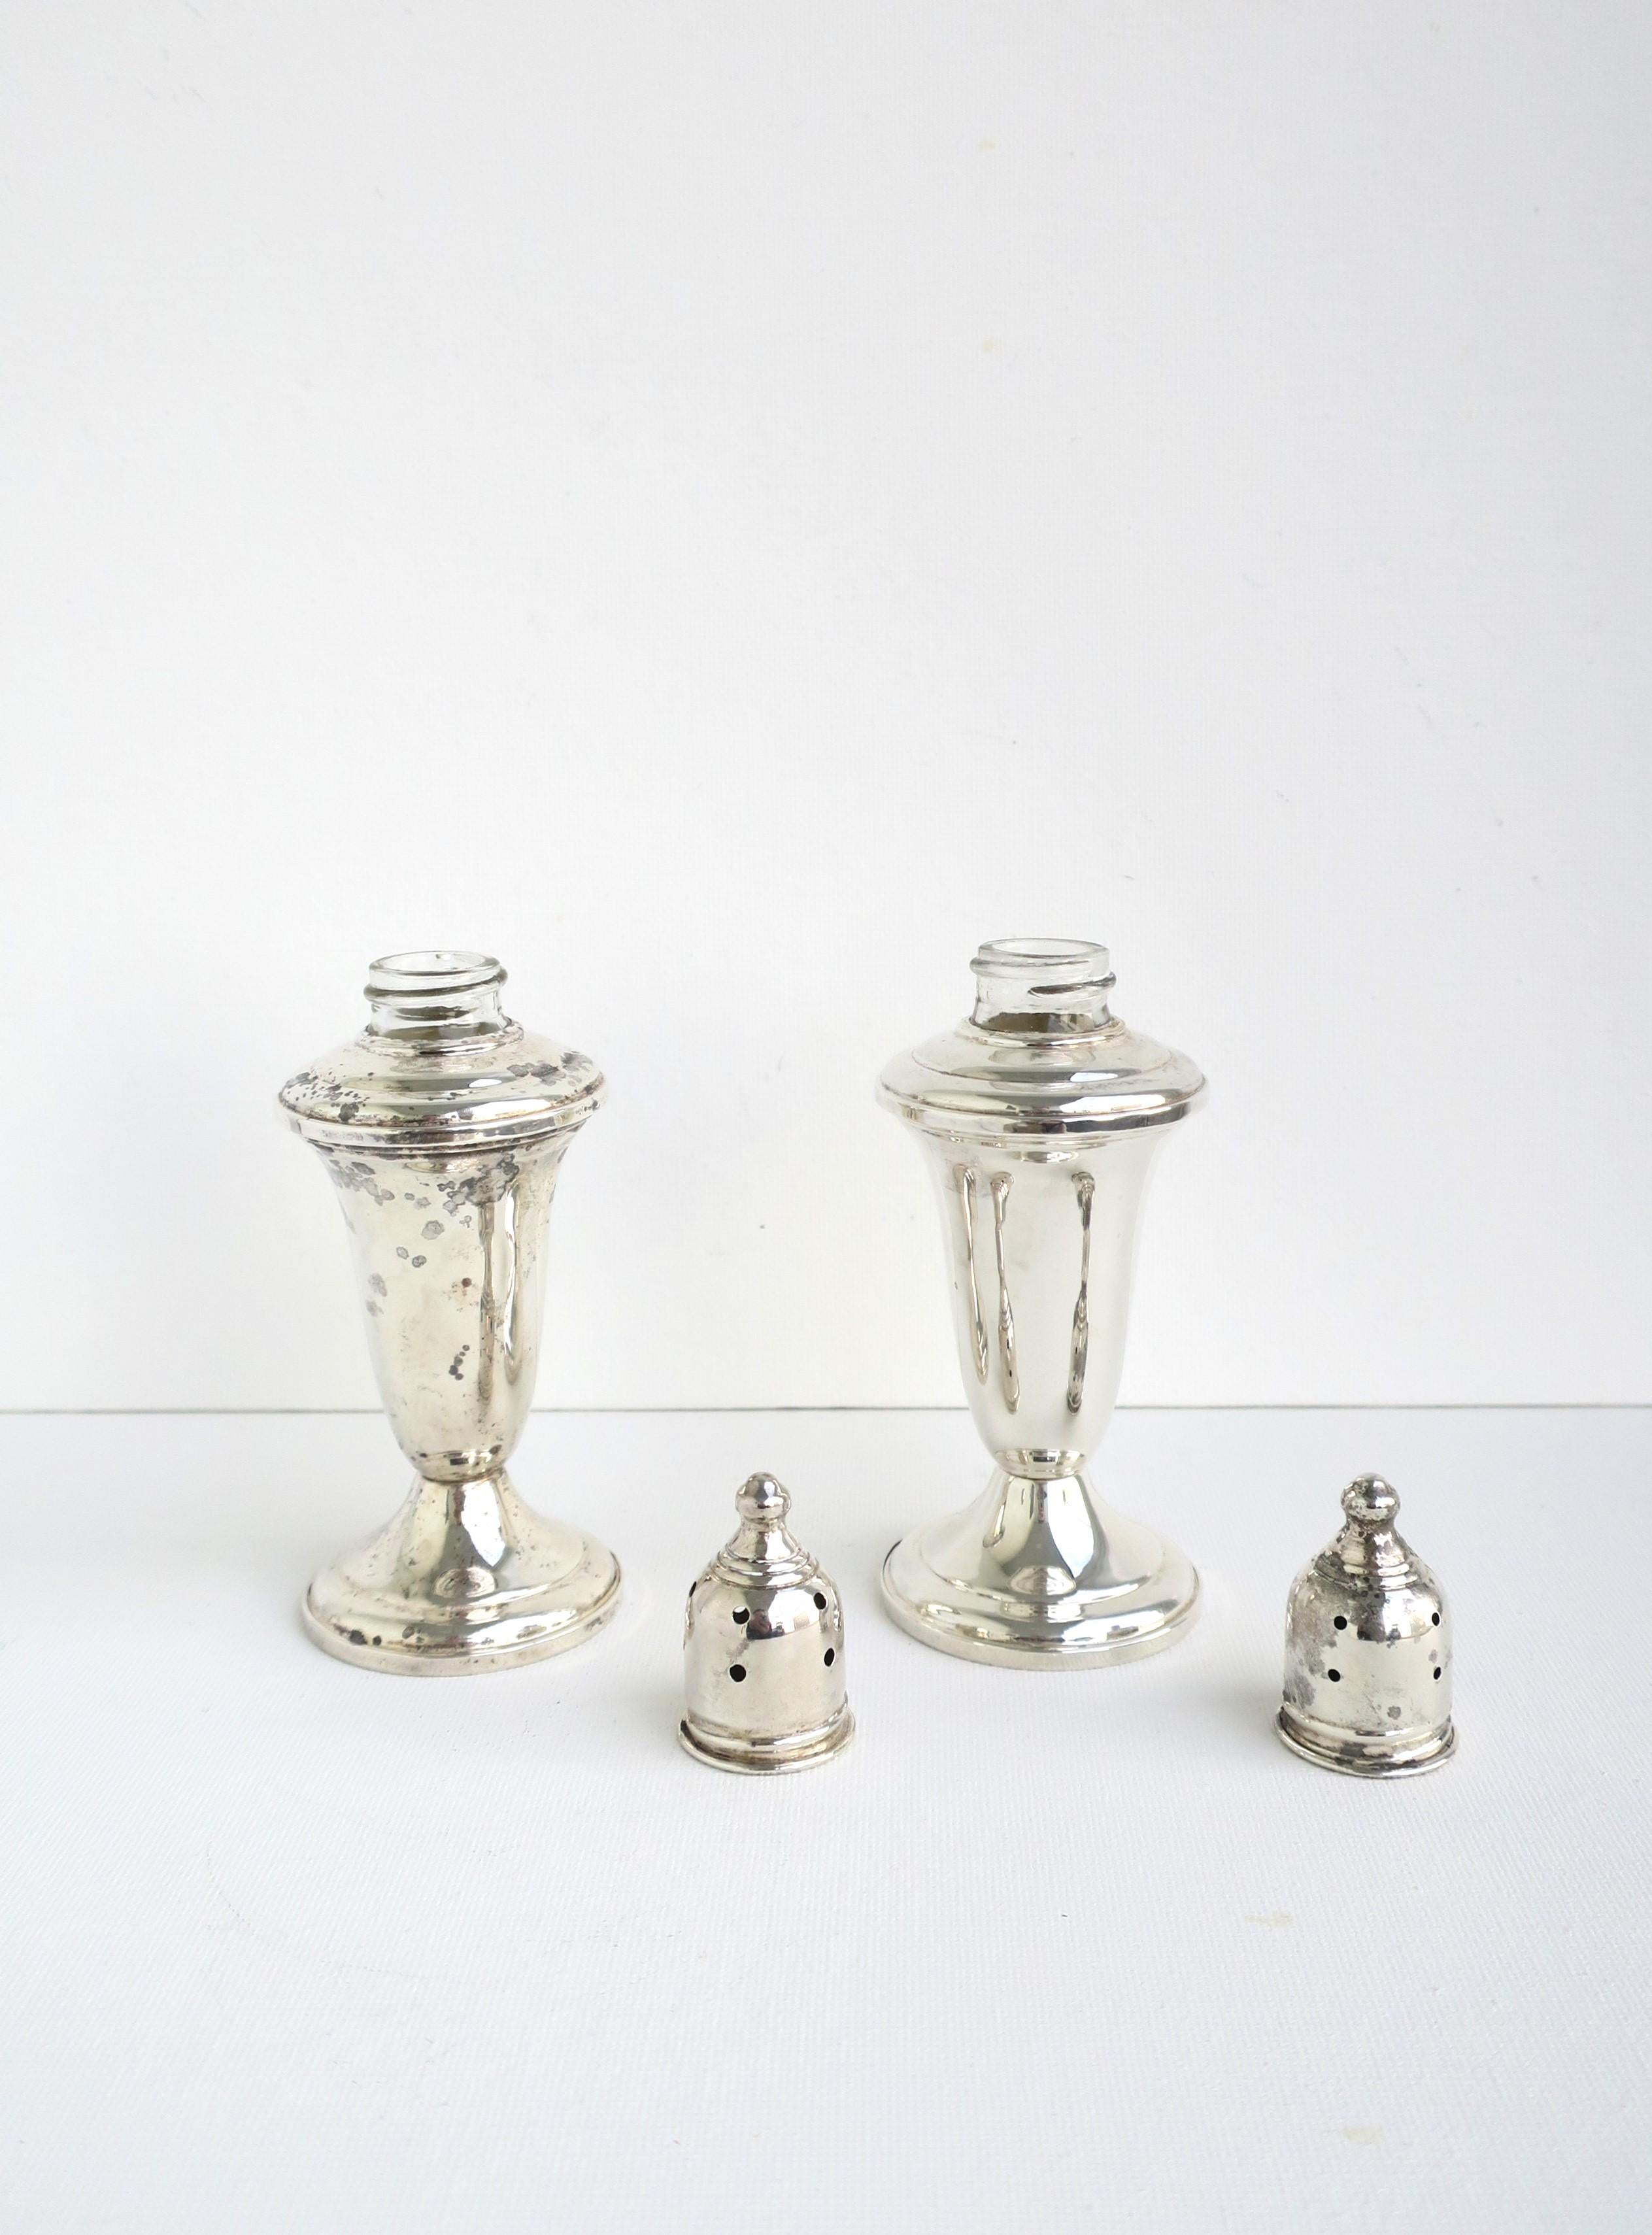 Sterling Silver Shreve Crump & Low, Salt and Pepper Shakers, Pair 2